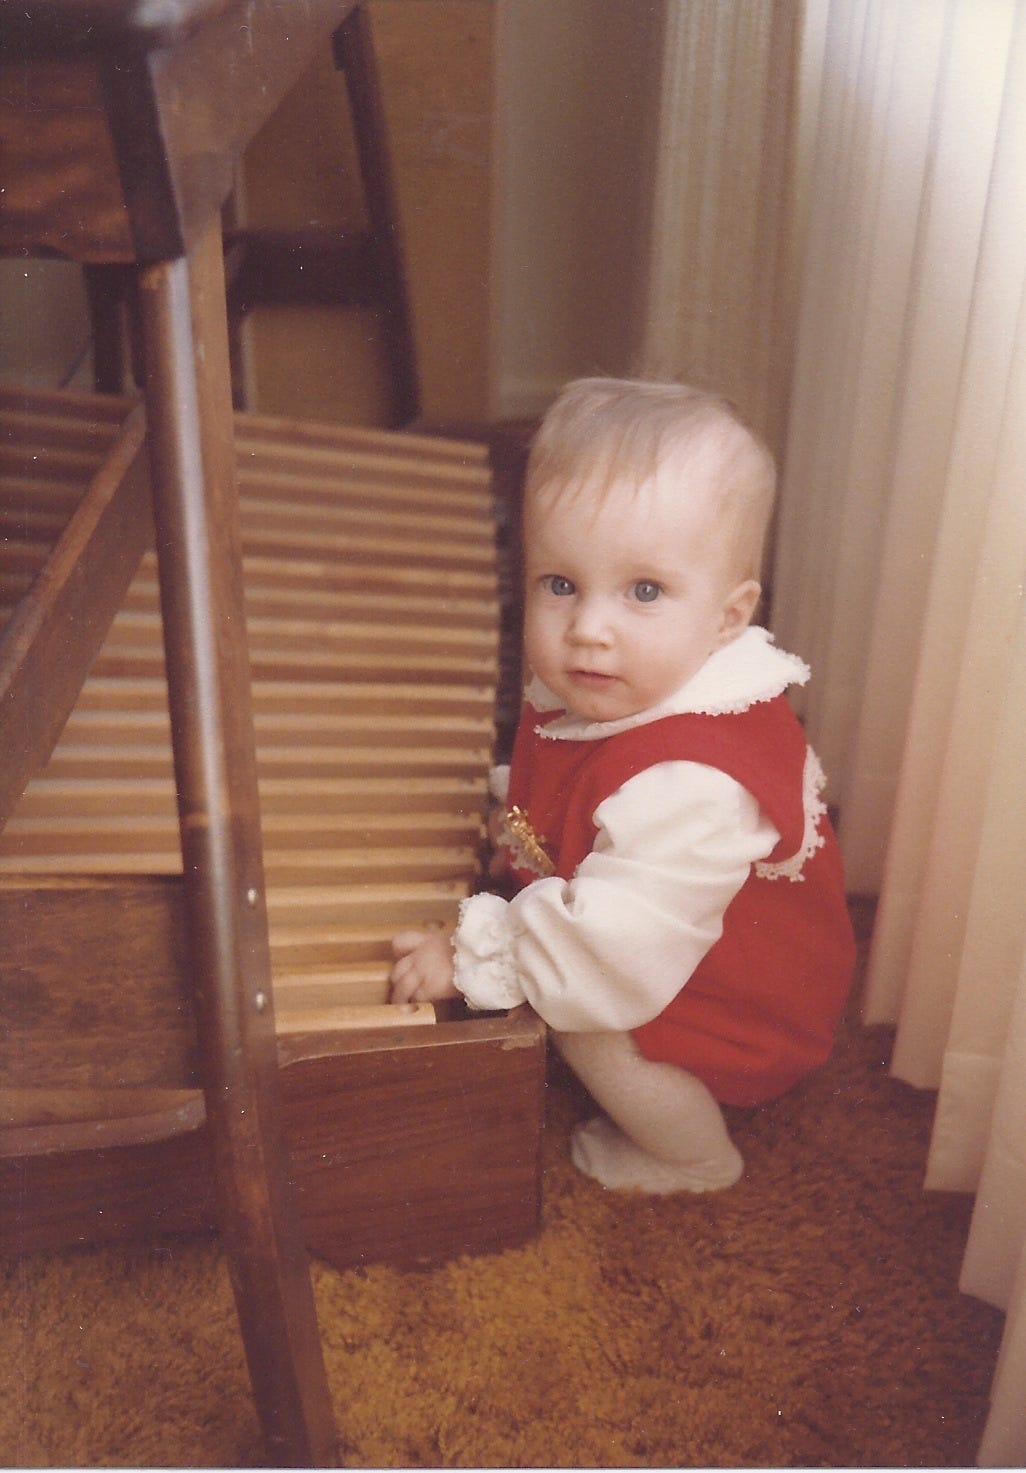 image of the author as a baby, wearing a red outfit and squatting next to the pedals of an organ